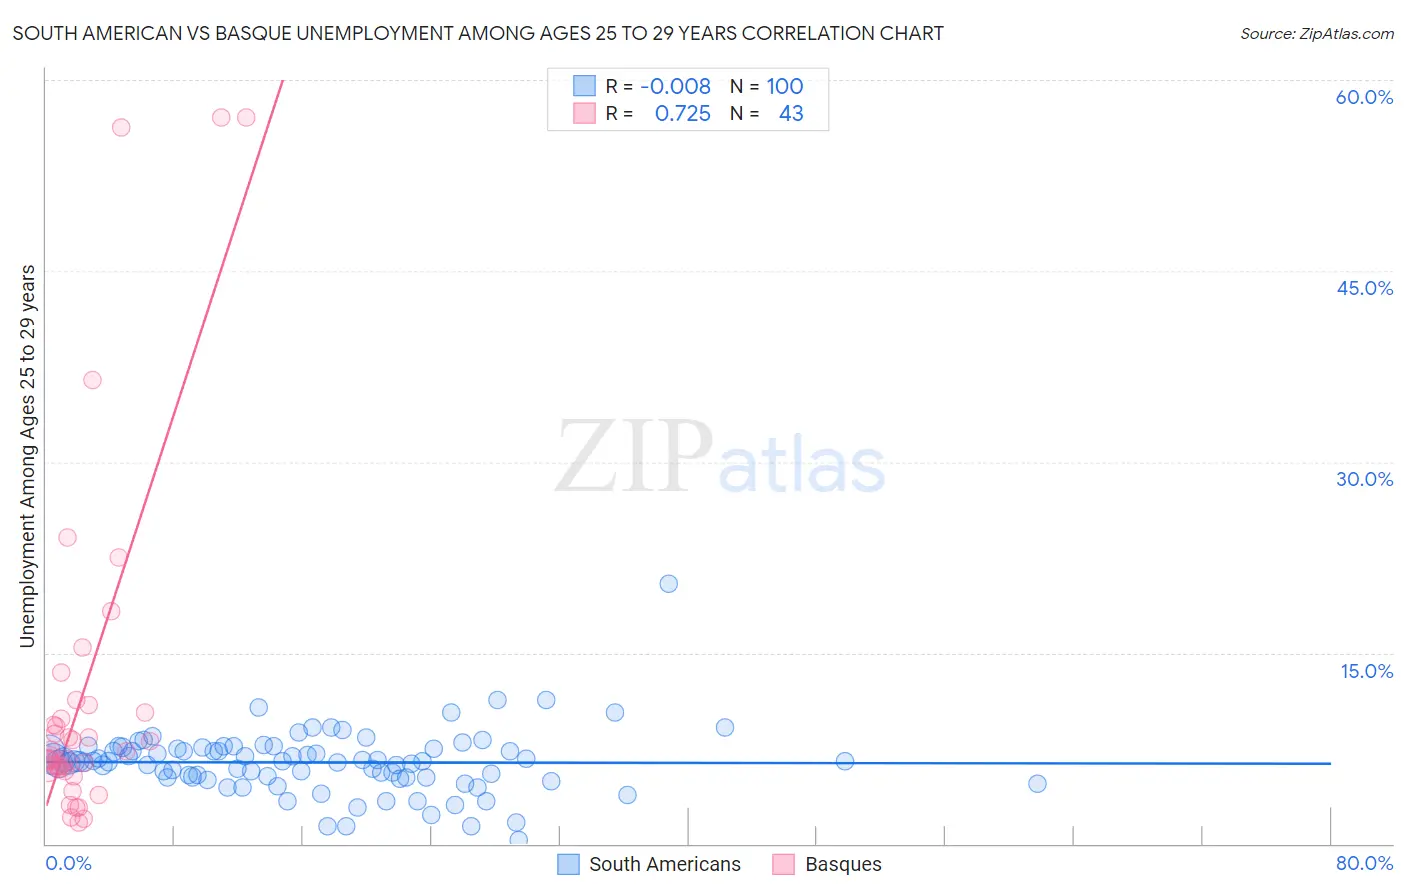 South American vs Basque Unemployment Among Ages 25 to 29 years